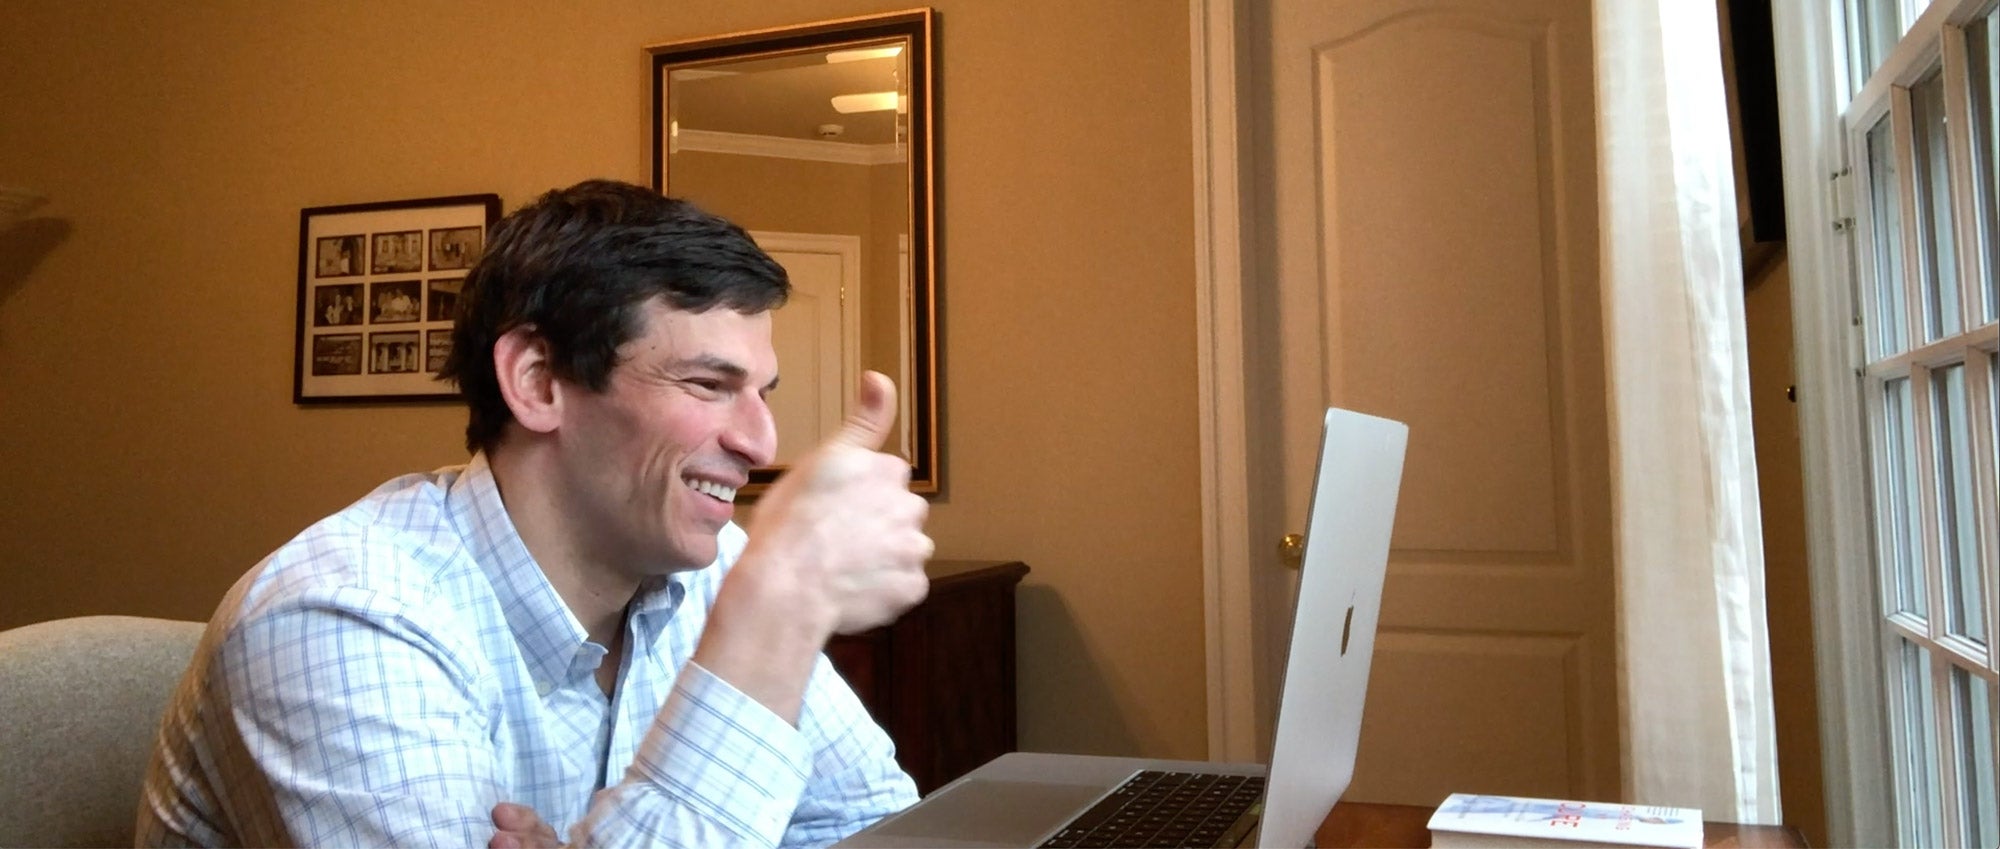 Dr. David Fajgenbaum seated at his laptop giving a thumbs up while participating in a video conference call